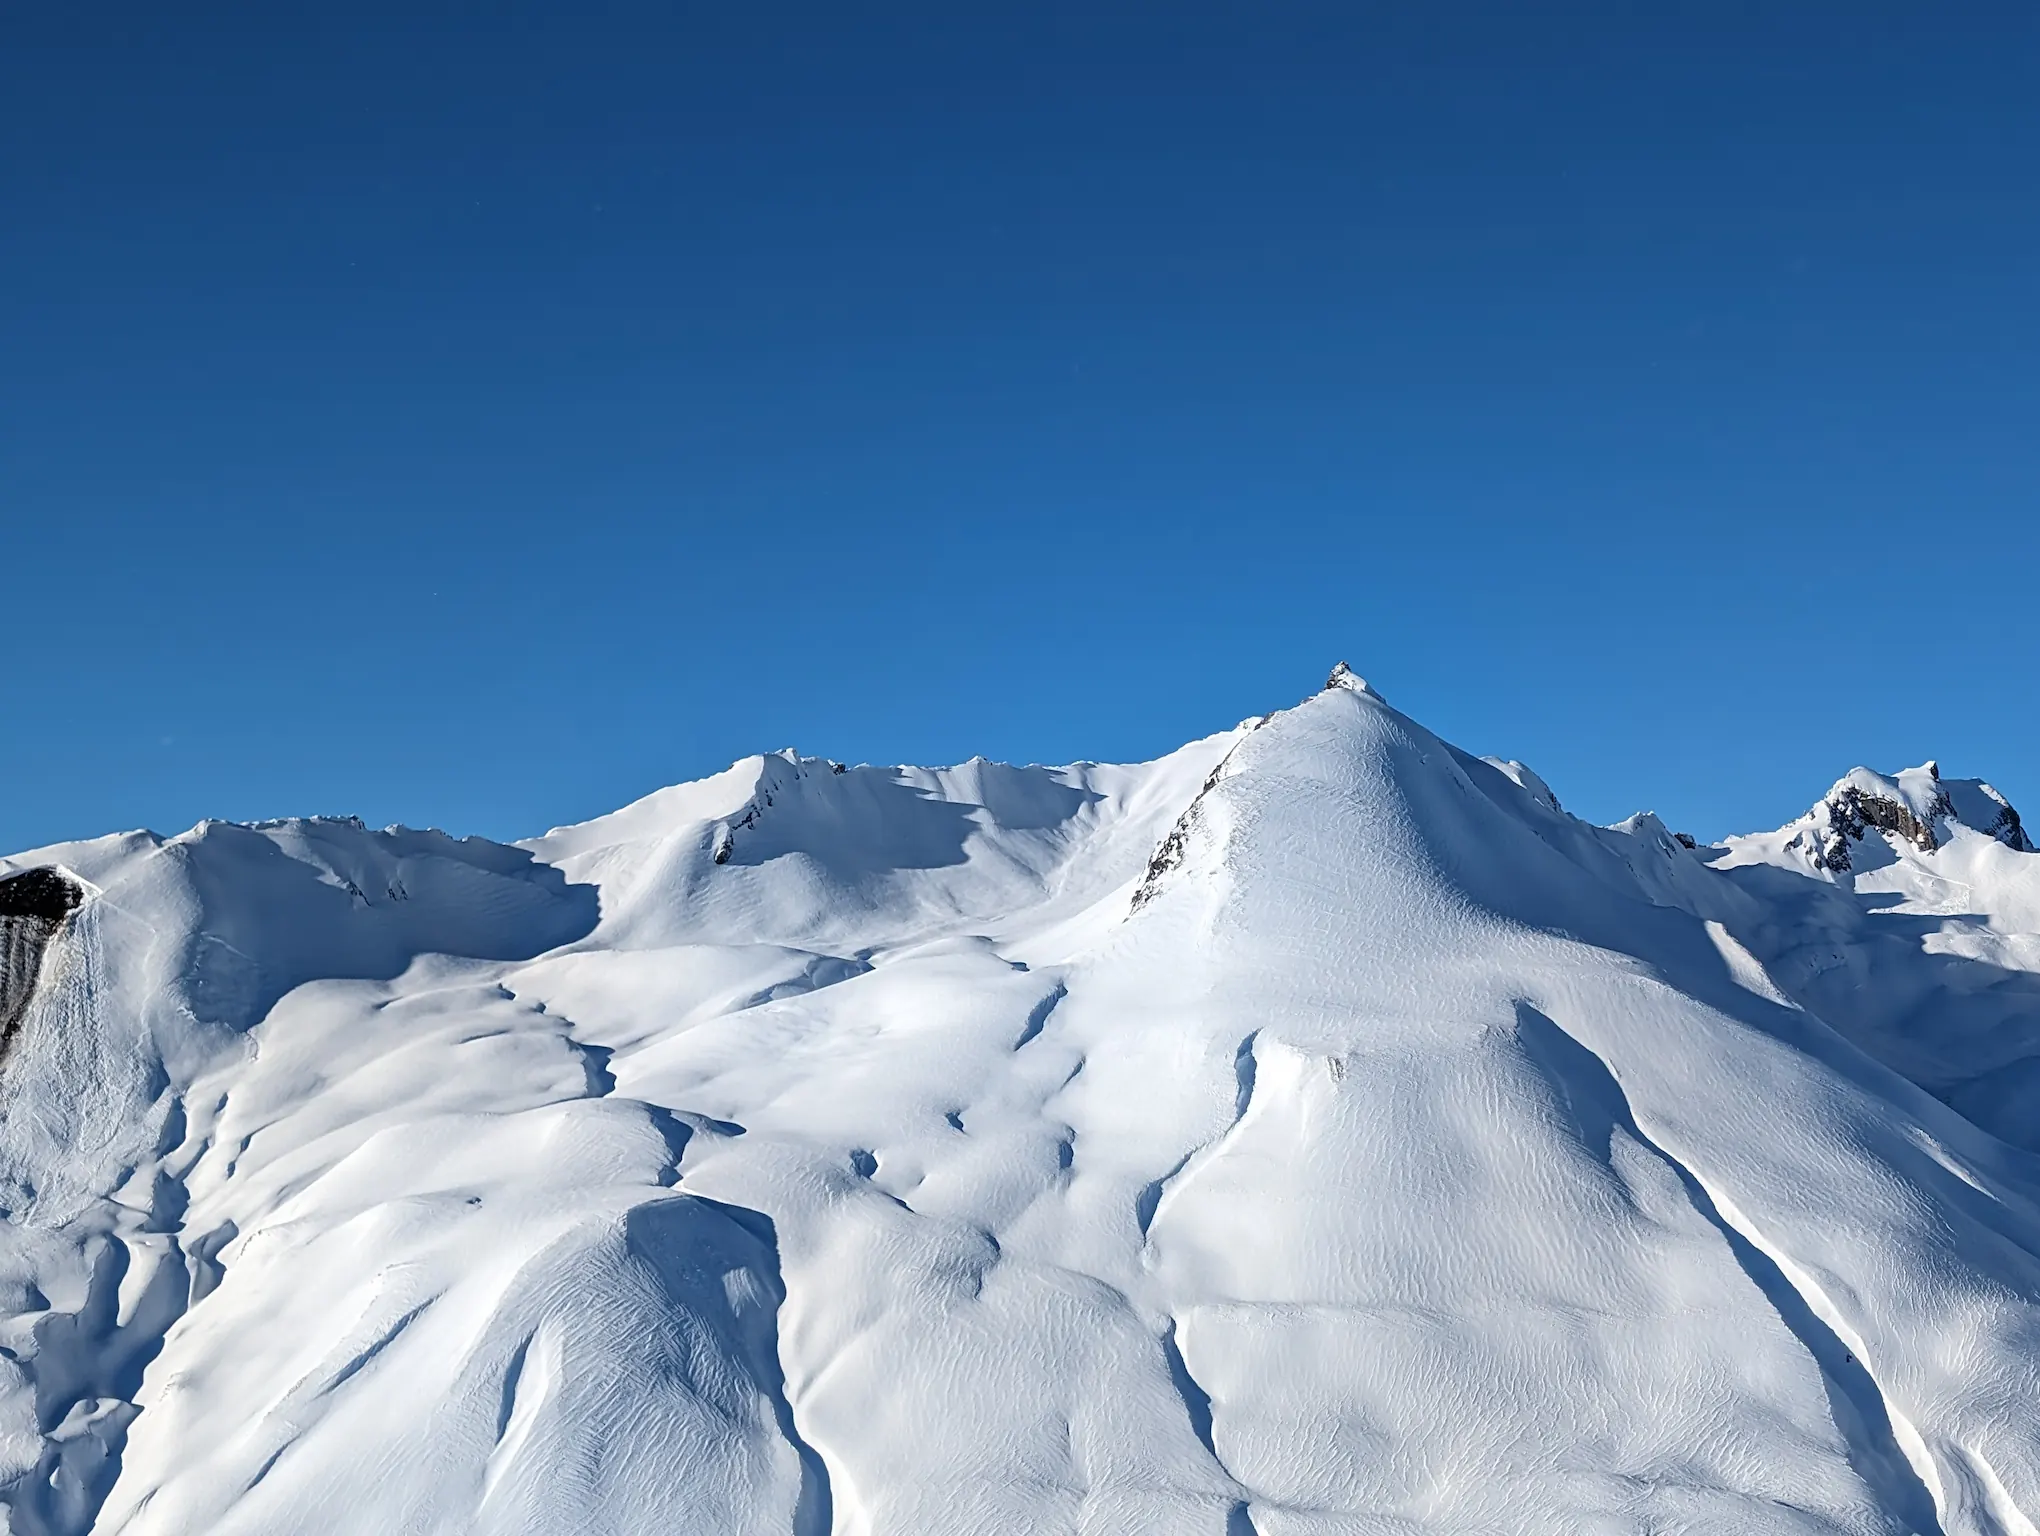 A snowy mountain top under blue skies. A few rocky peaks peeking underneath the snow. On the left hand side, traces of an avalanche